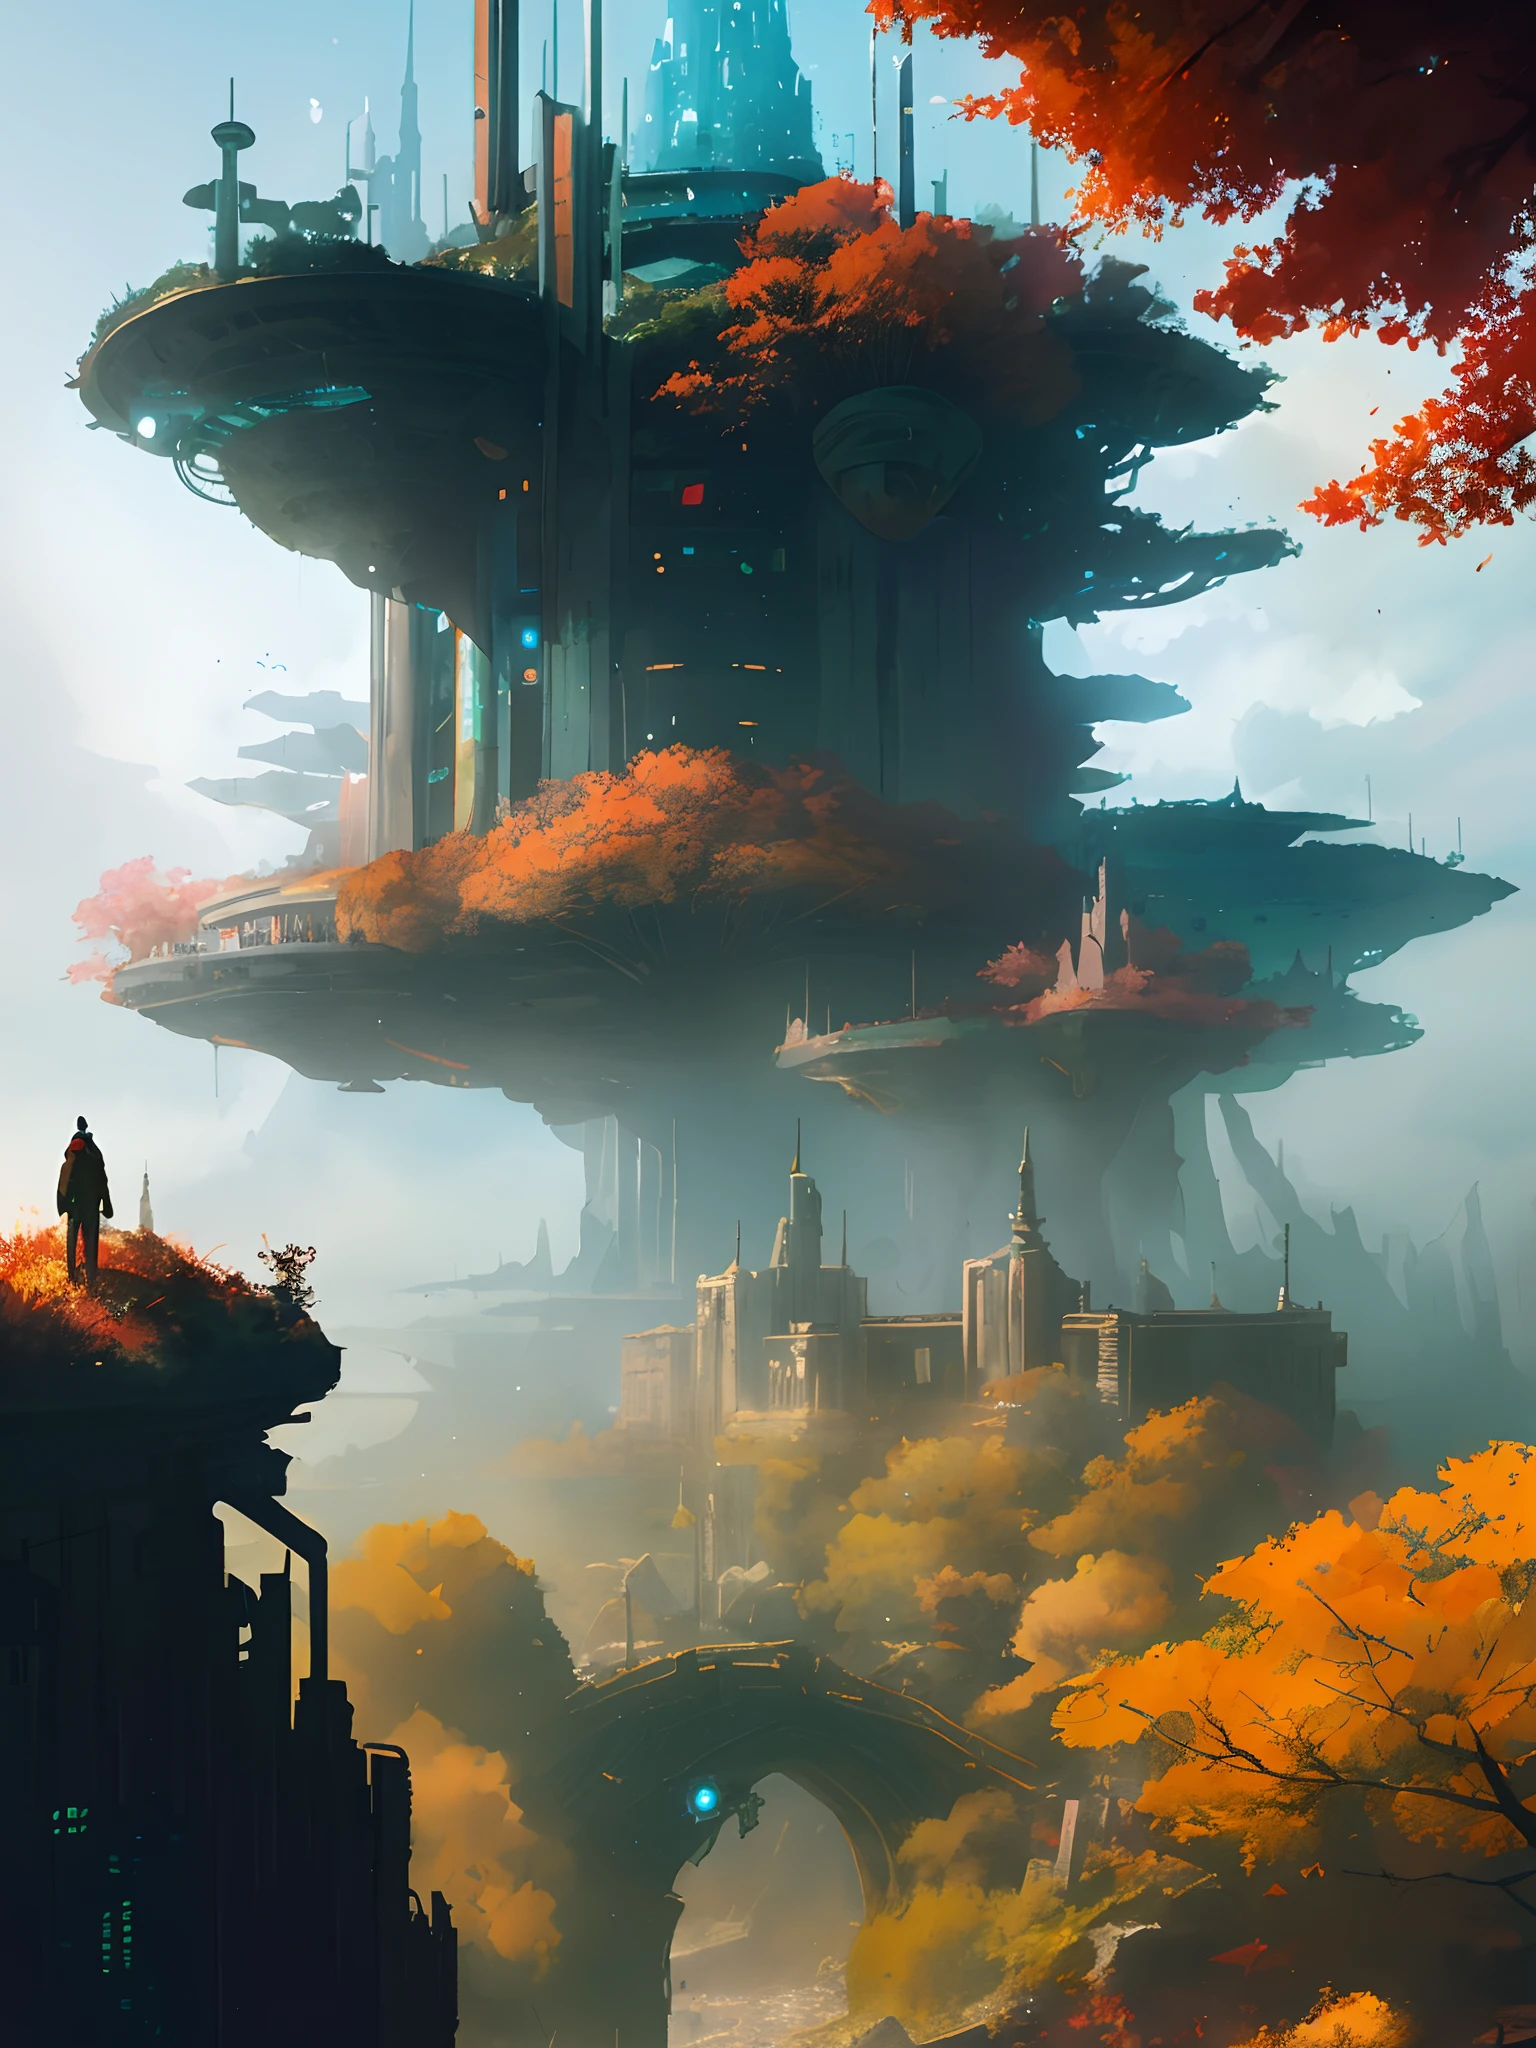 Wet watercolor painting,there is a girl standing on a hill looking at a futuristic city, paul lehr and beeple, inspired by Paul Lehr, arstation and beeple highly, epic fantasy sci fi illustration, in fantasy sci - fi city, cyberpunk in foliage, by Mike "Beeple" Winkelmann, concept art wallpaper 4k, greg beeple